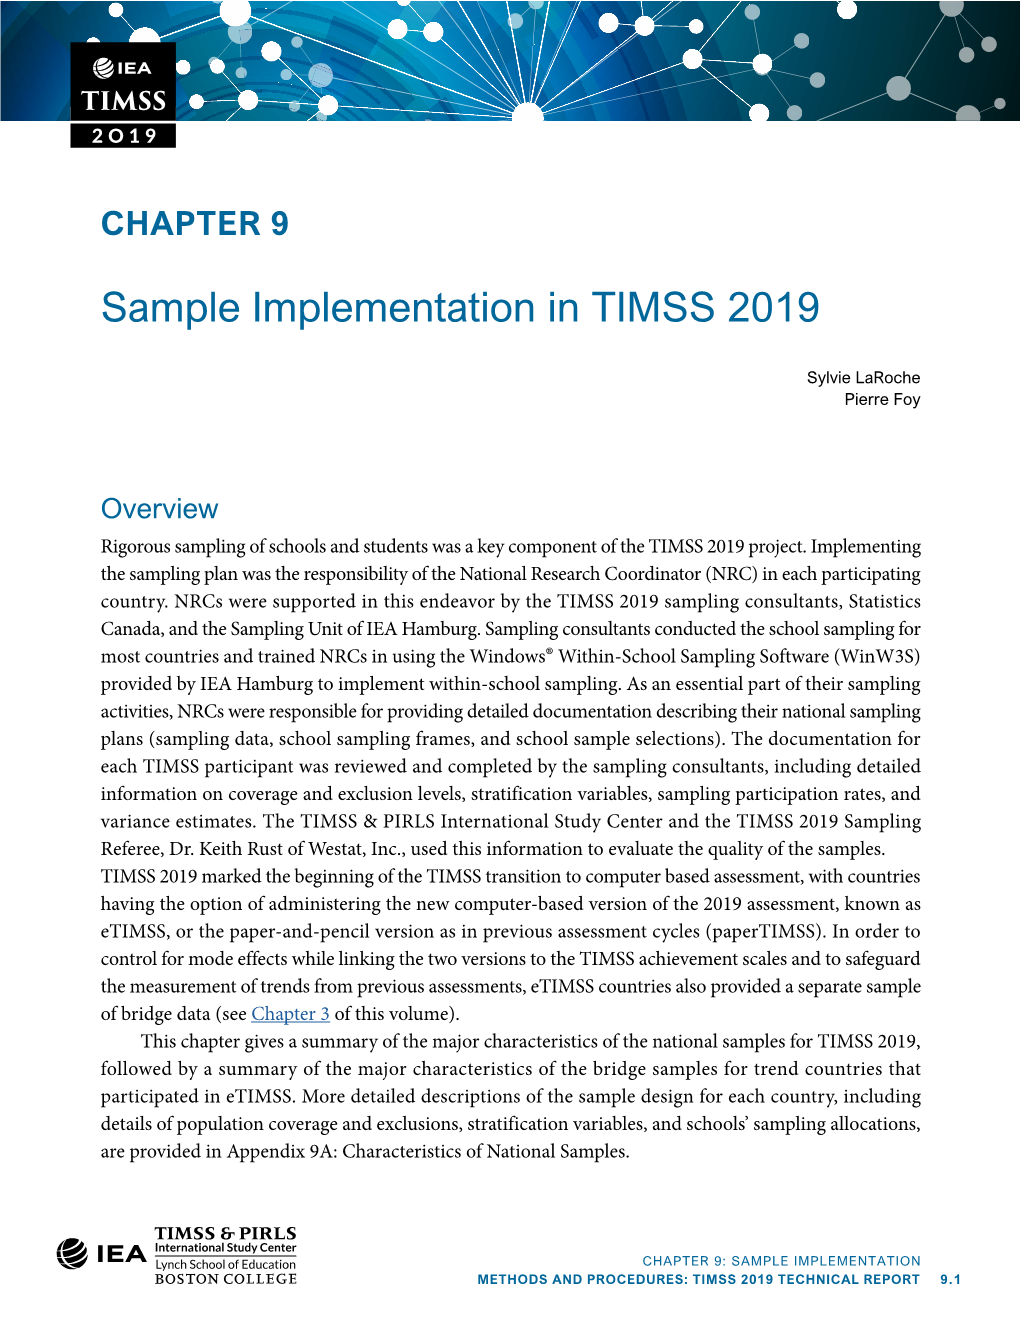 Sample Implementation in TIMSS 2019